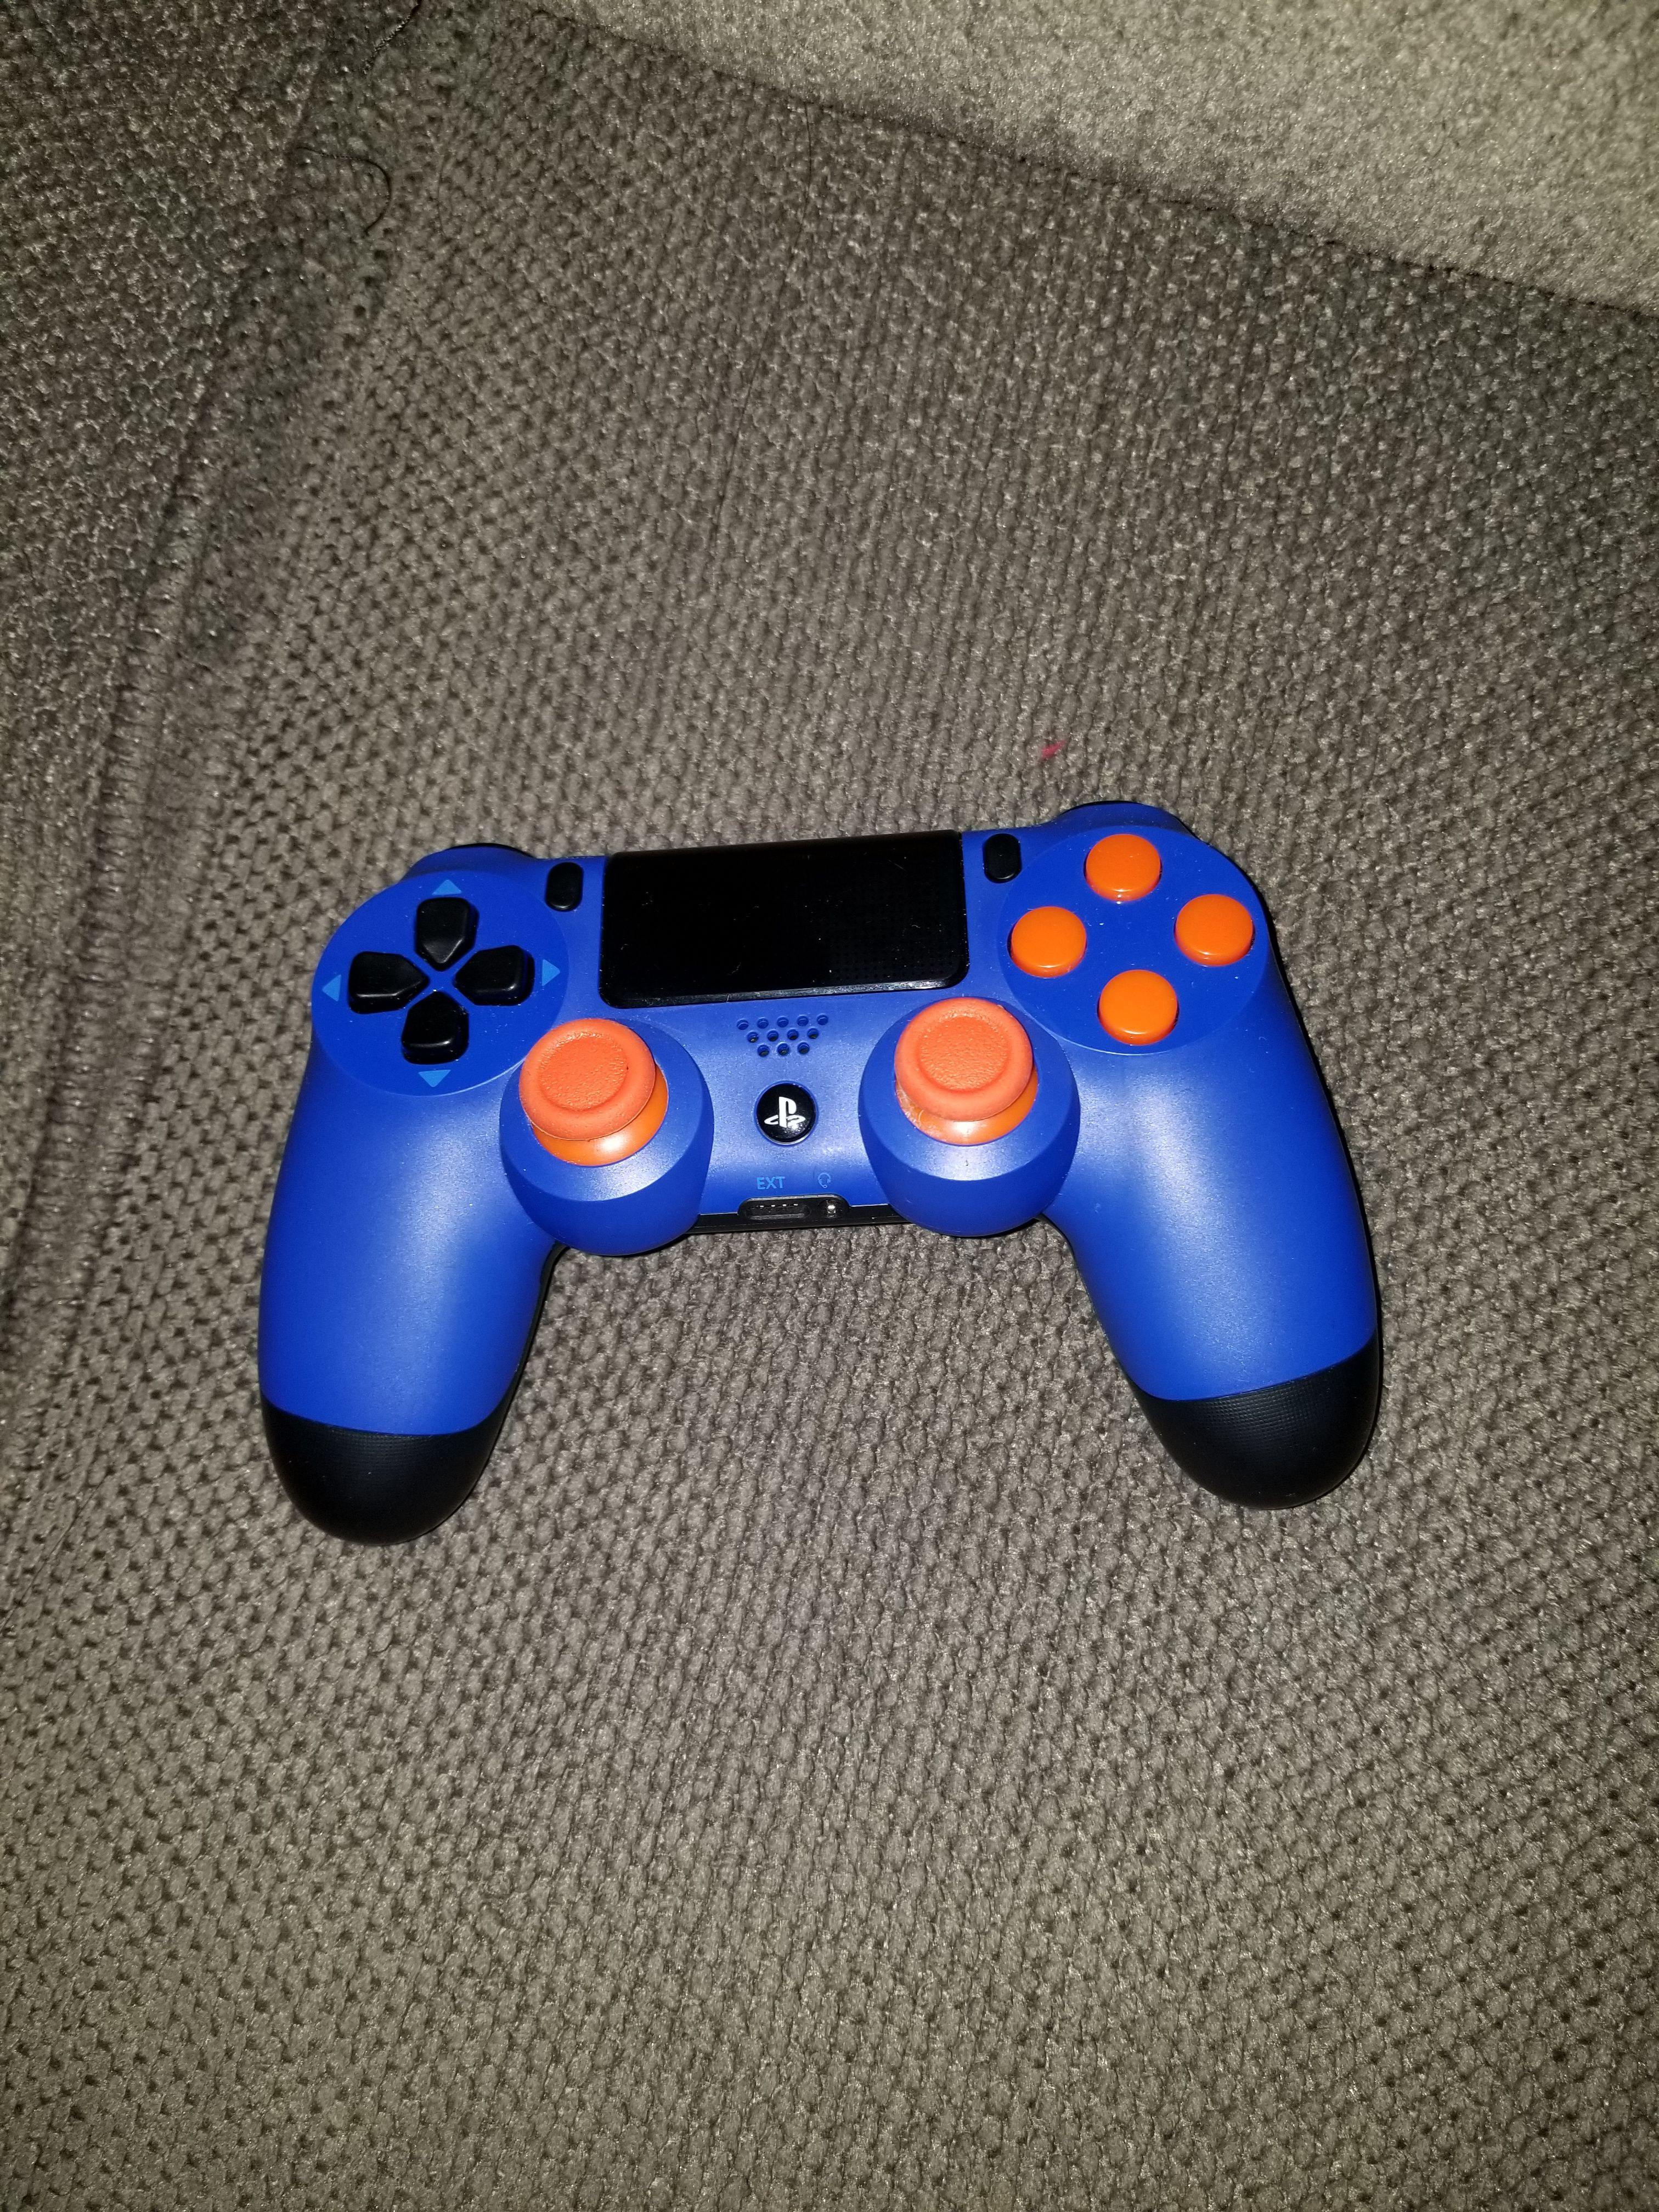 Modded ps4 controller